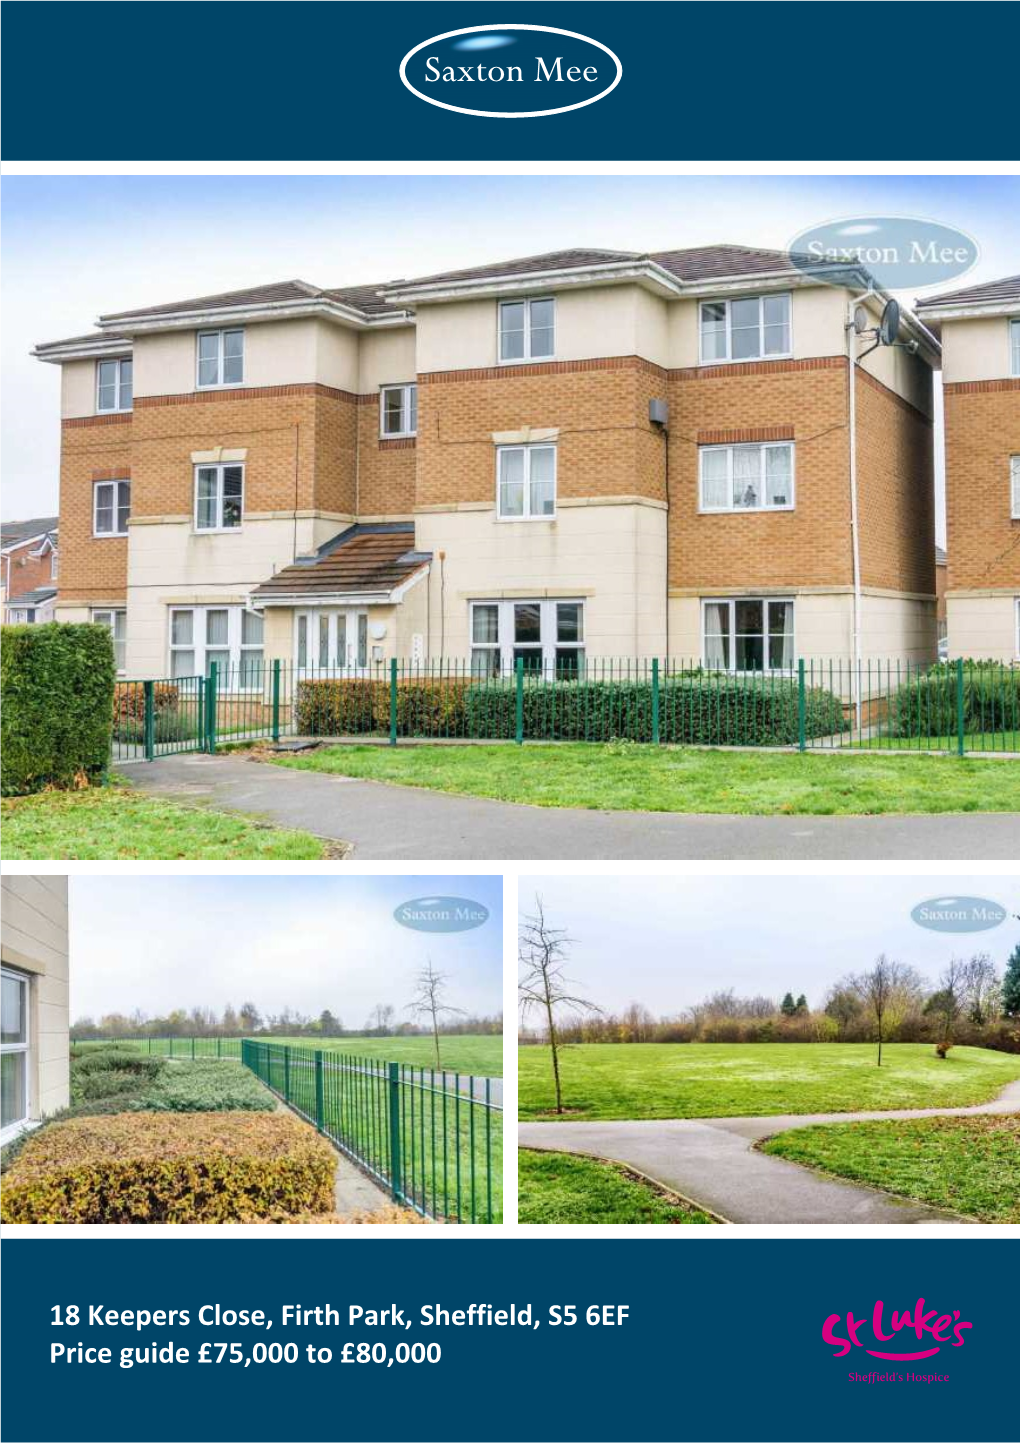 18 Keepers Close, Firth Park, Sheffield, S5 6EF Price Guide £75,000 to £80,000 She Ield’S Hospice 18 Keepers Close Firth Park Price Guide £75,000 to £80,000